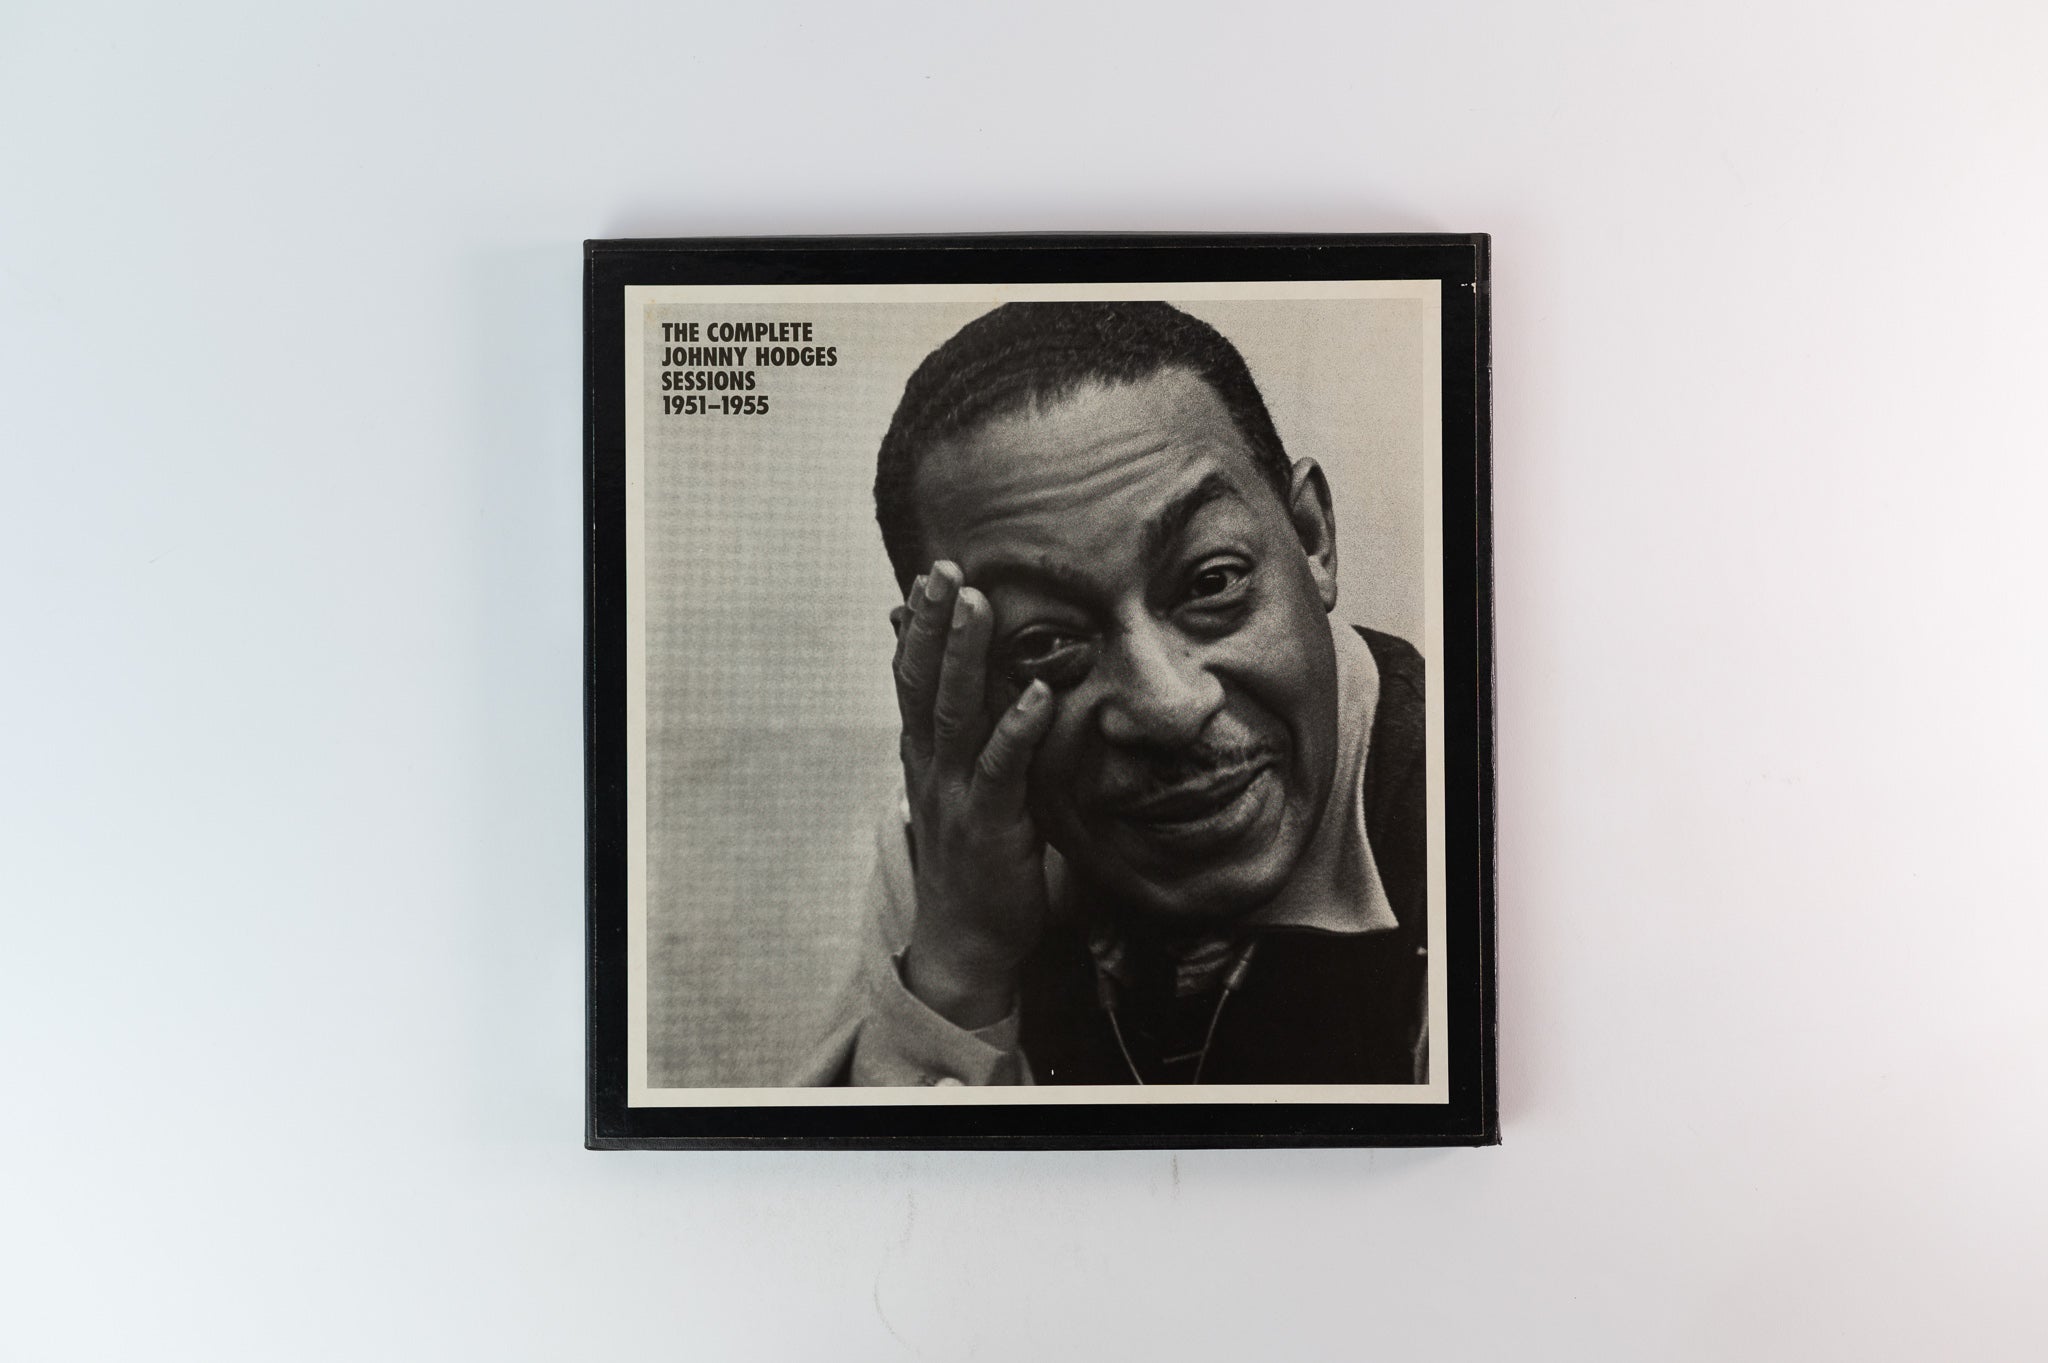 Johnny Hodges - The Complete Johnny Hodges Sessions 1951 - 1955 on Mosaic Box Set